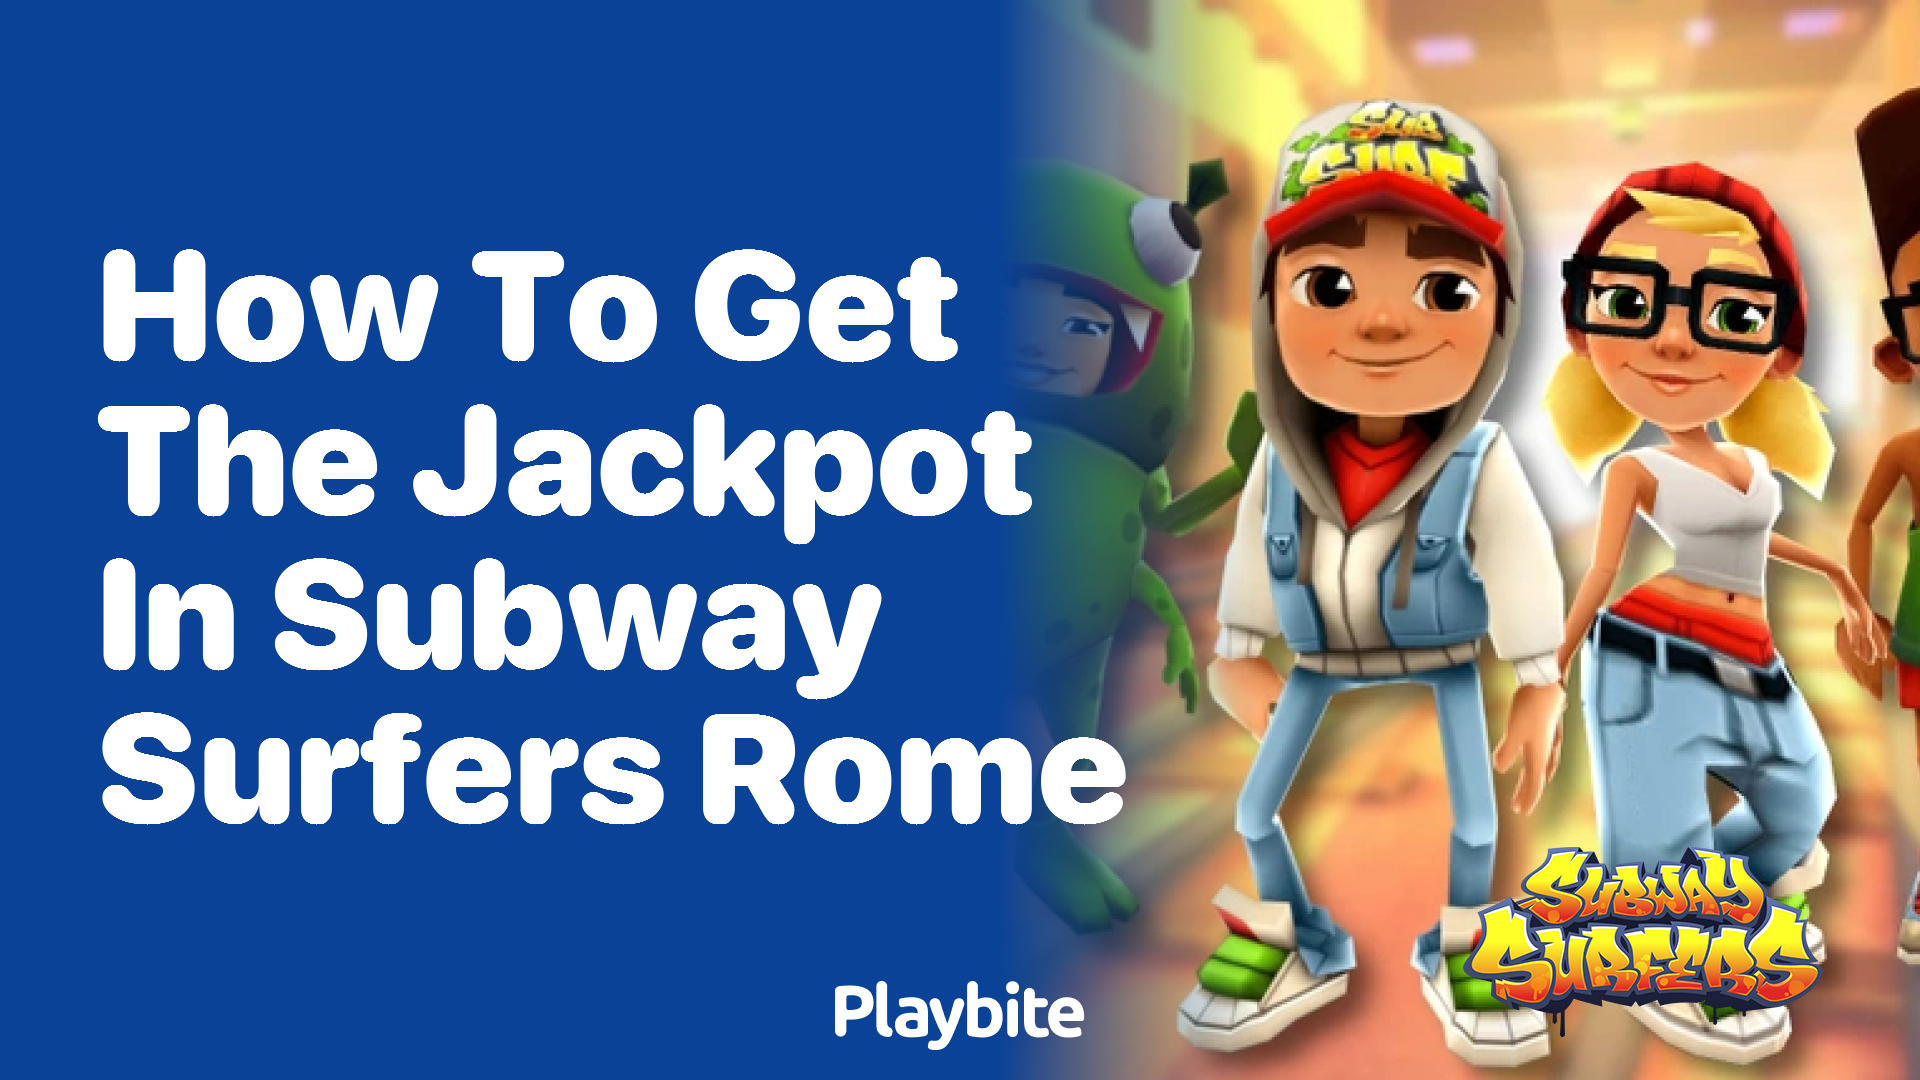 How to get the jackpot in Subway Surfers Rome?